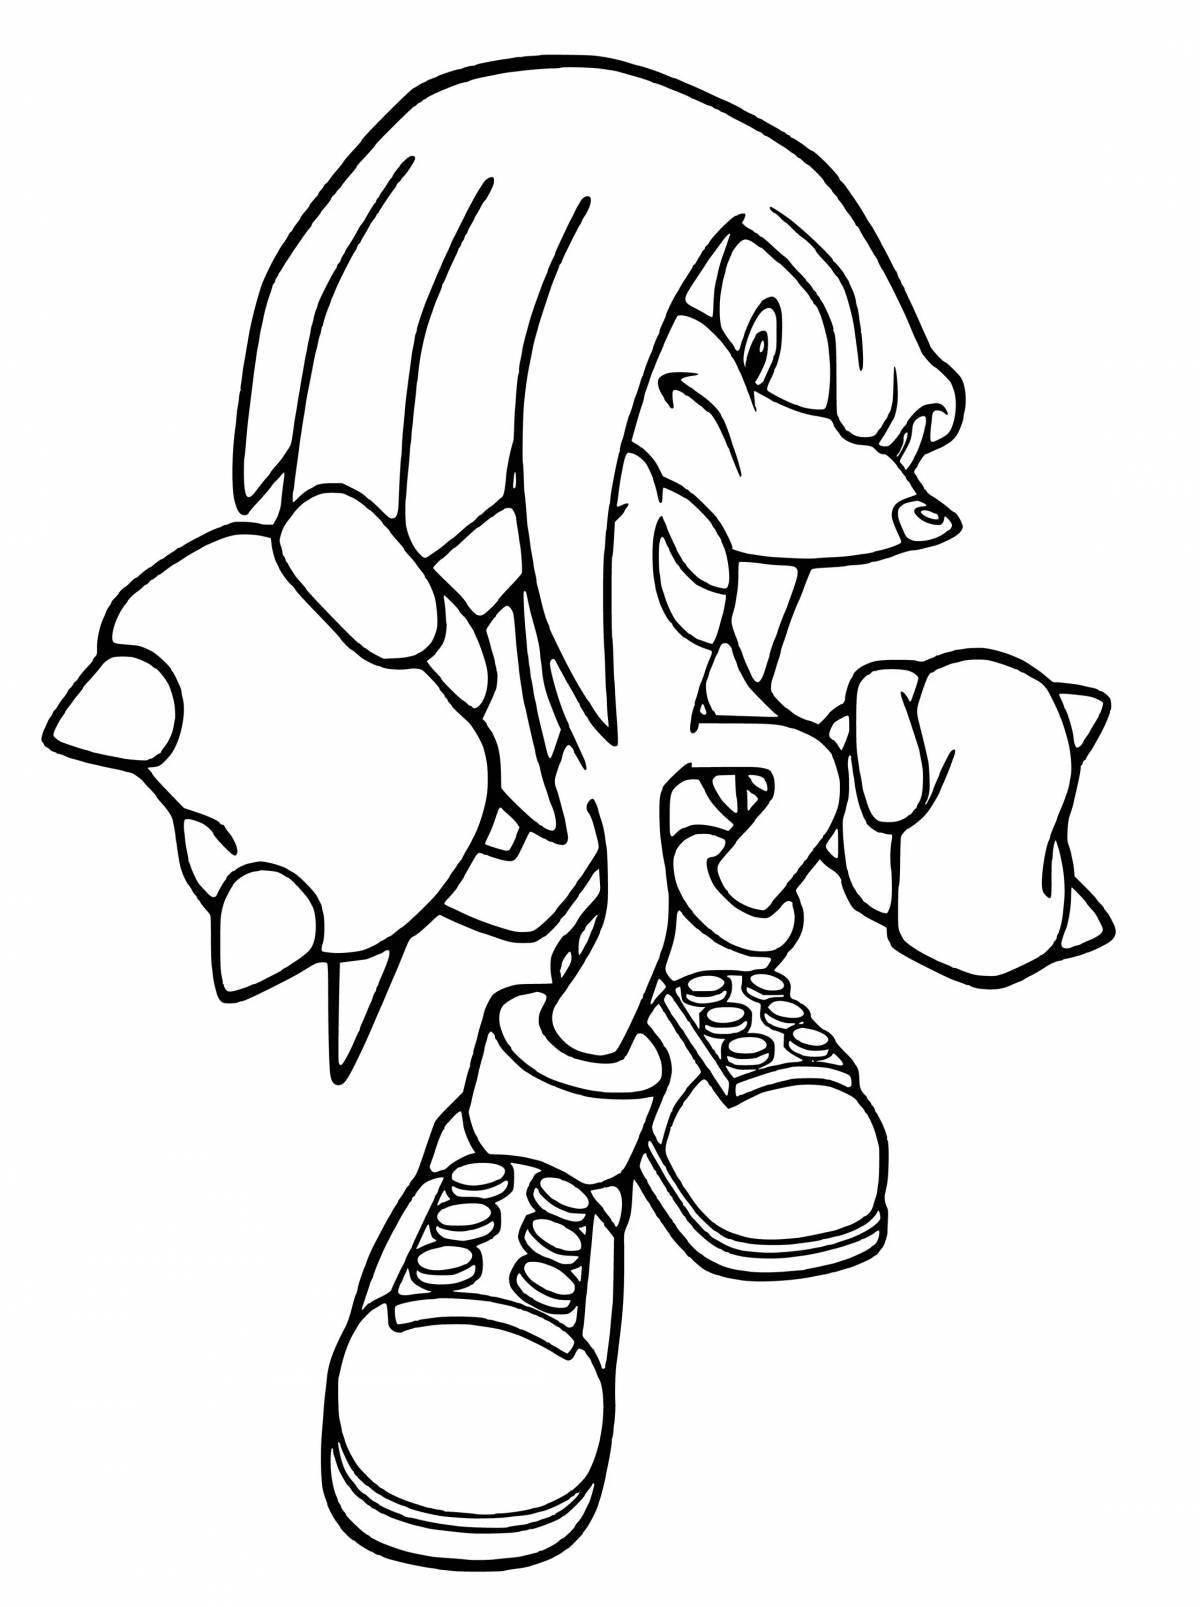 Coloring page joyful red friend